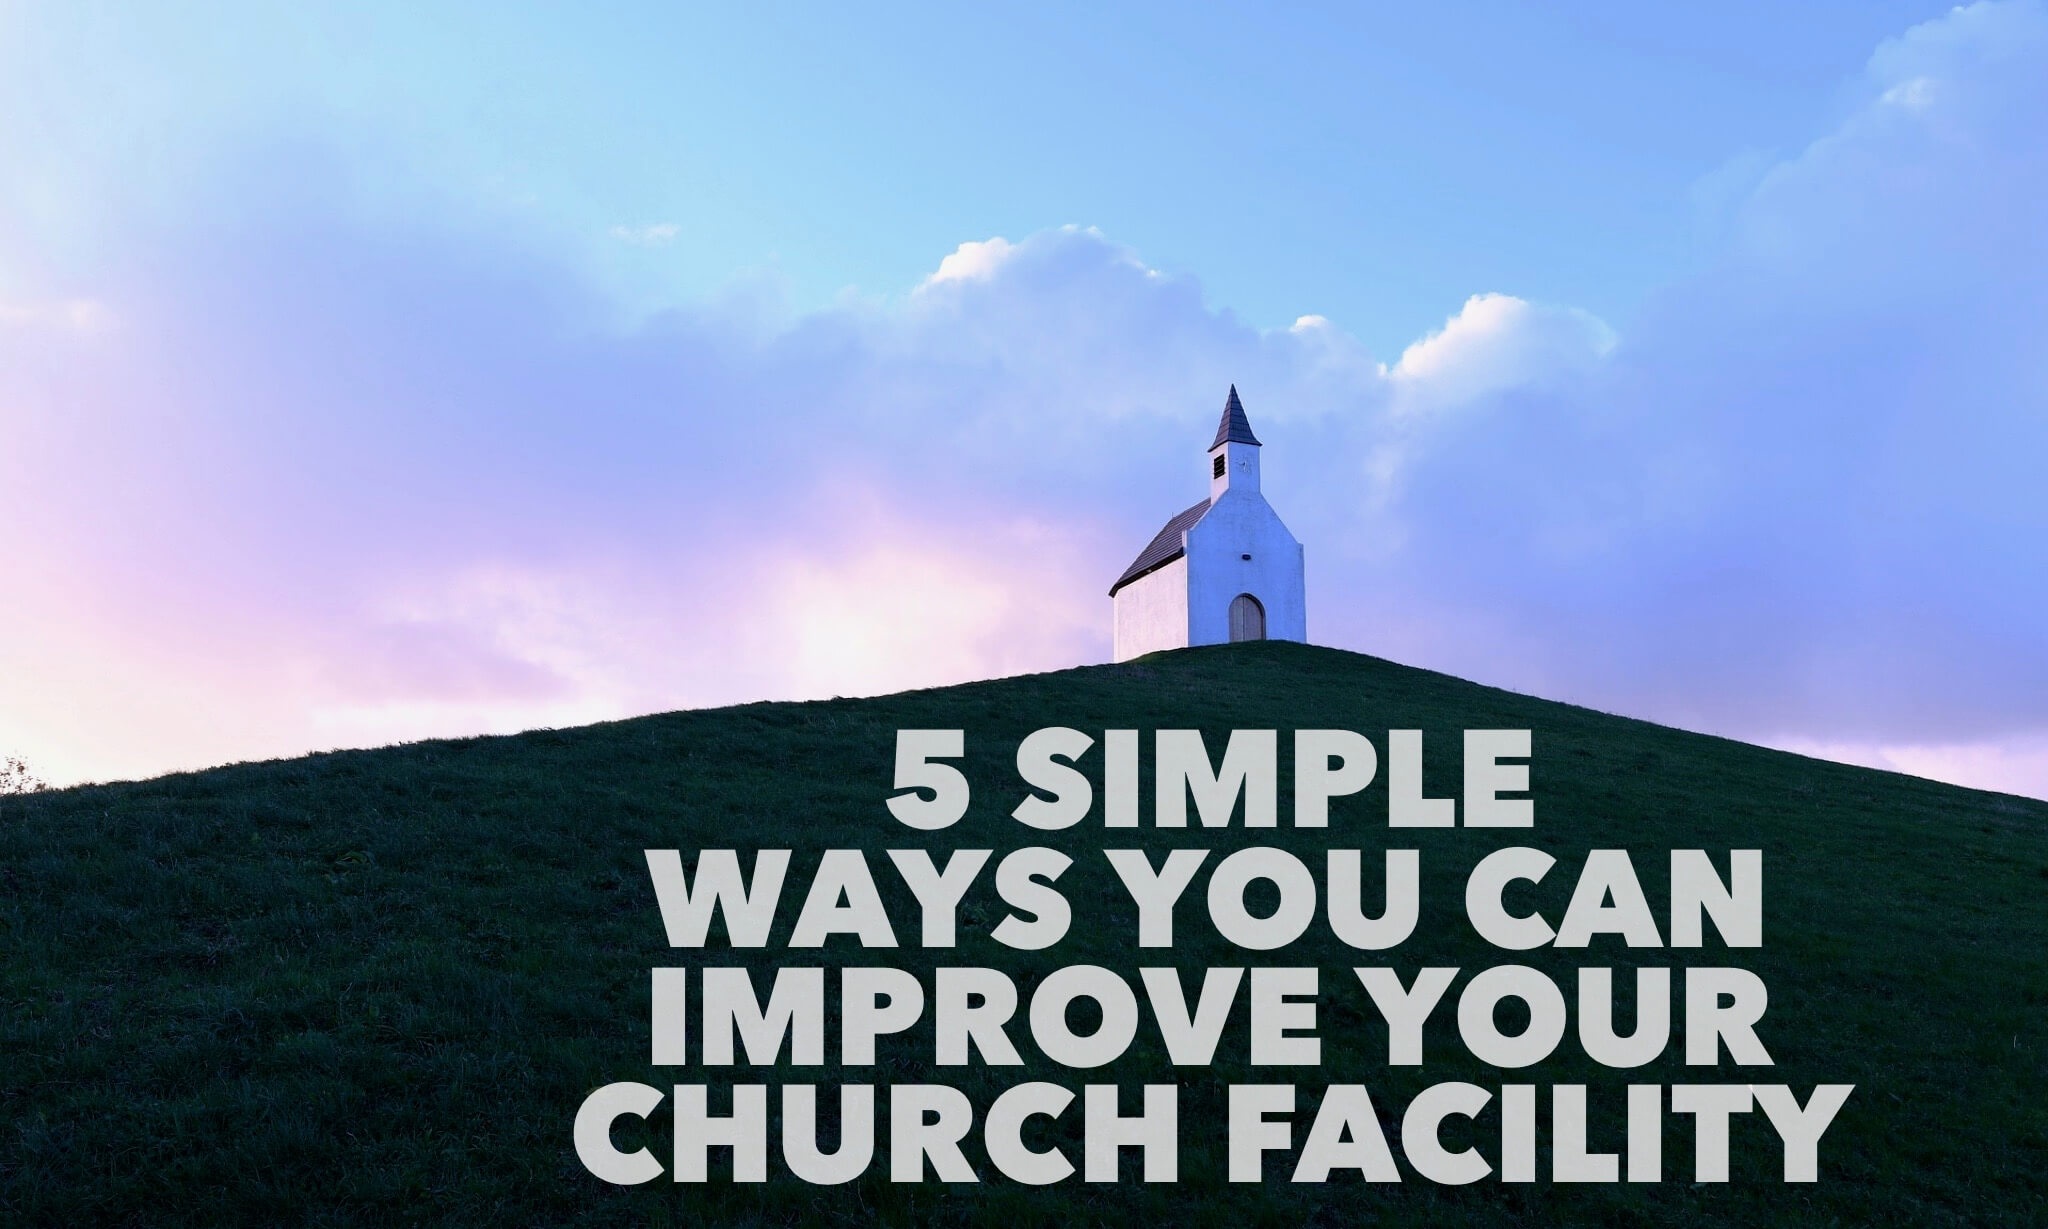 5 Simple Ways You Can Improve Your Church Facility